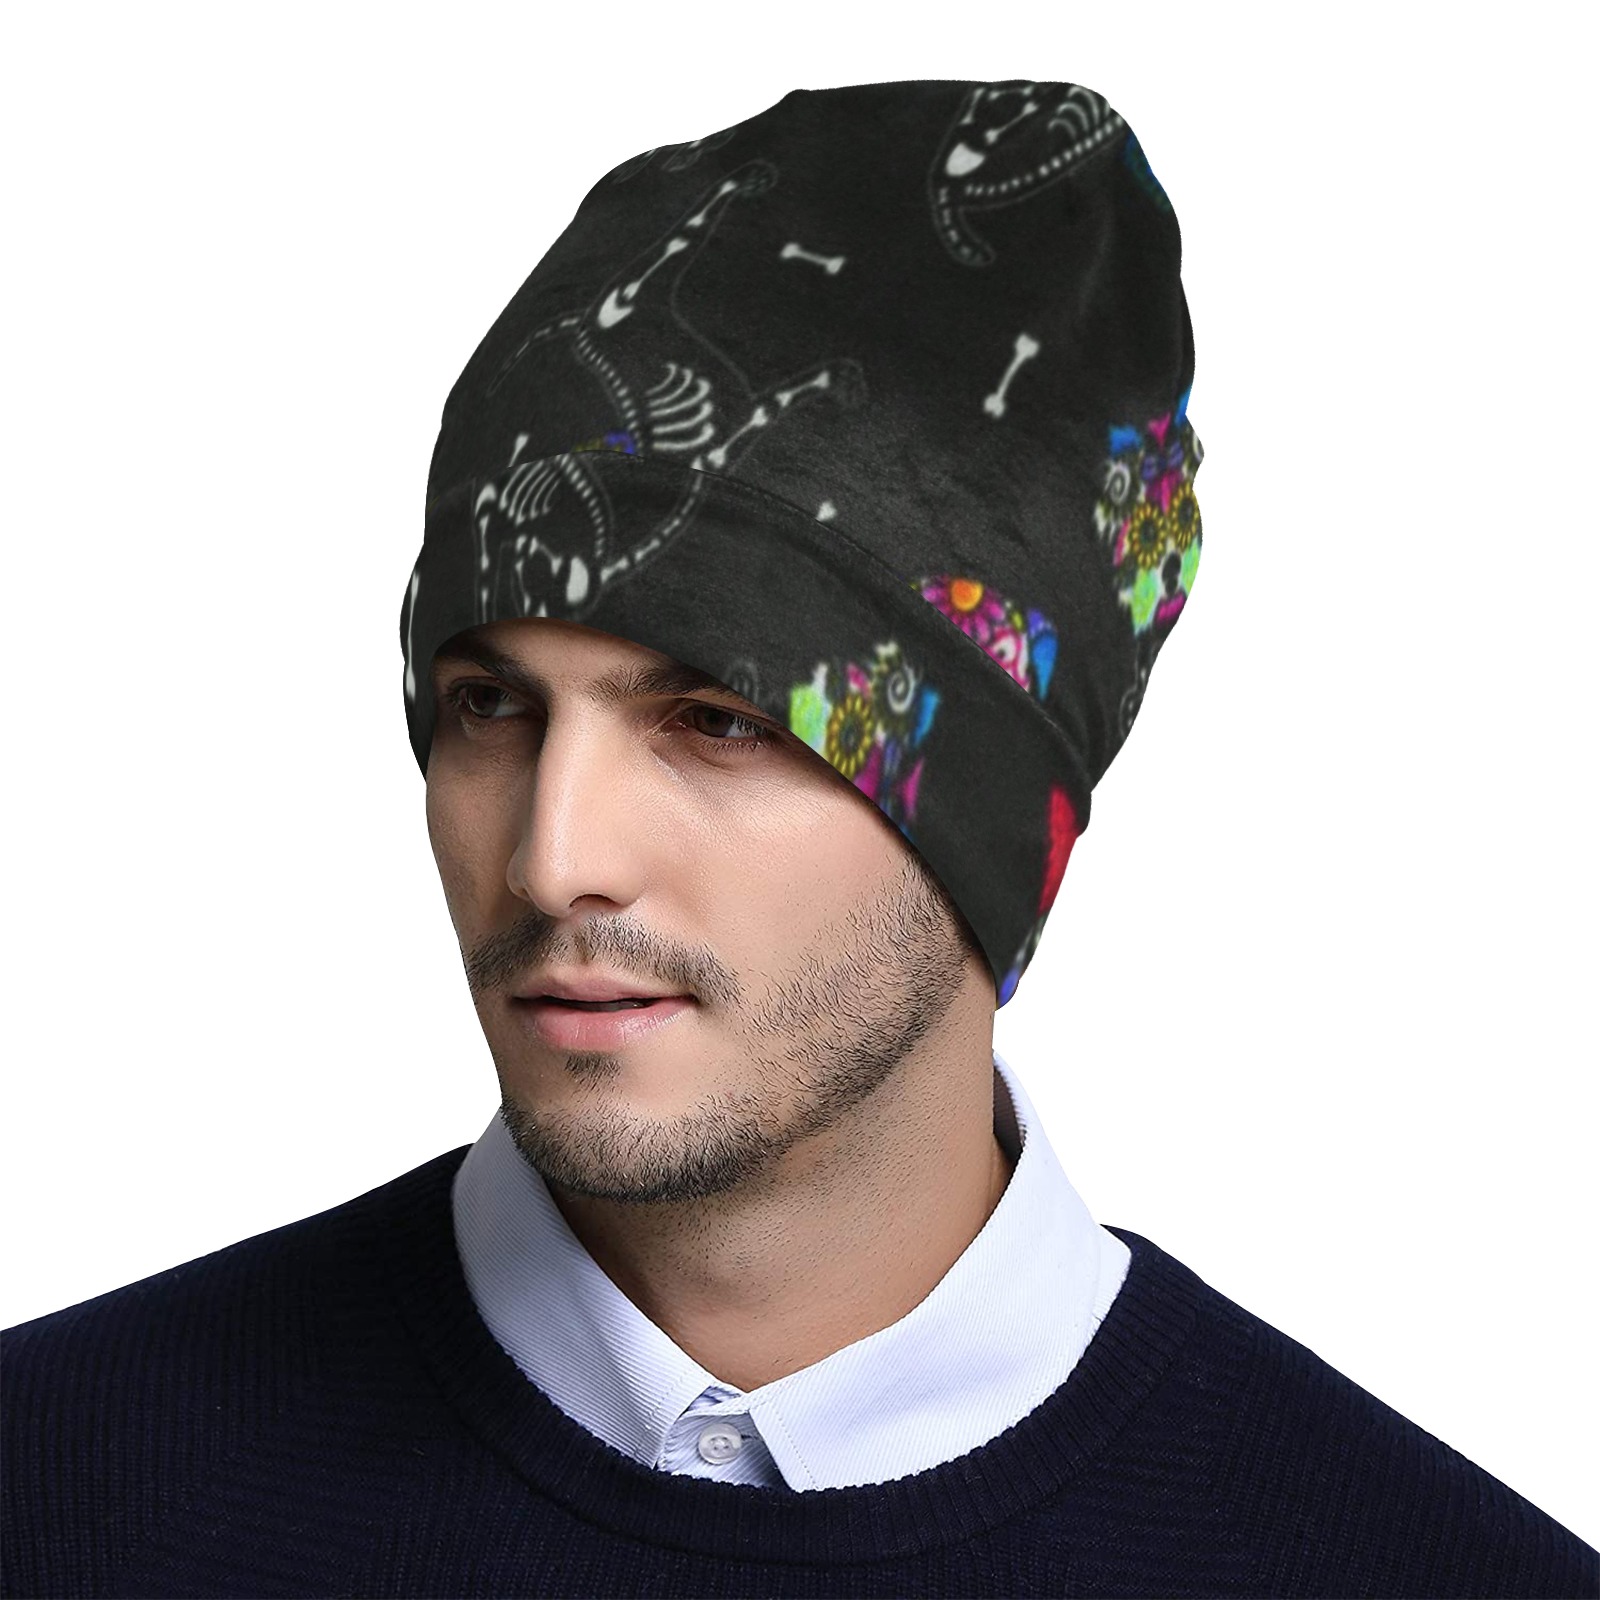 bb ngxr All Over Print Beanie for Adults